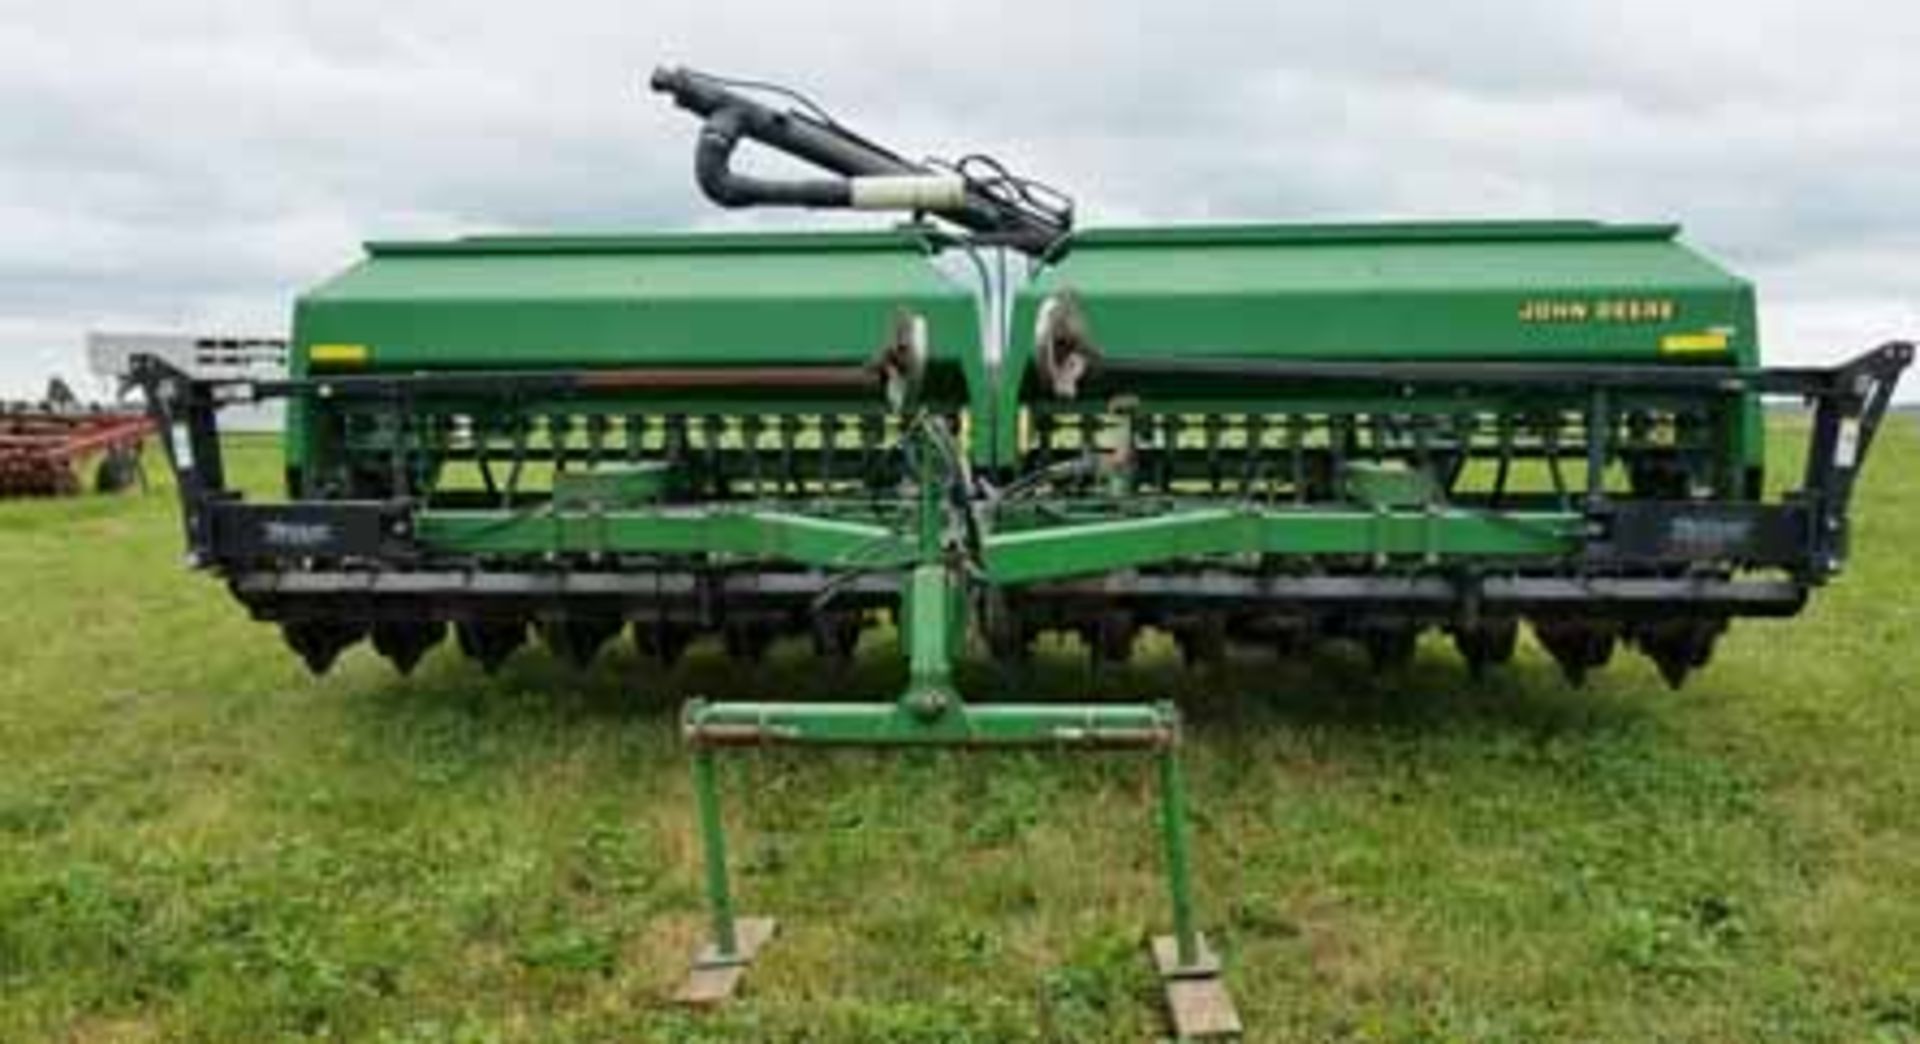 JOHN DEERE 1560 NO-TILL GRAIN DRILL, 20', YETTER MARKERS, FILL AUGER, LESS THAN 500 ACRES ON